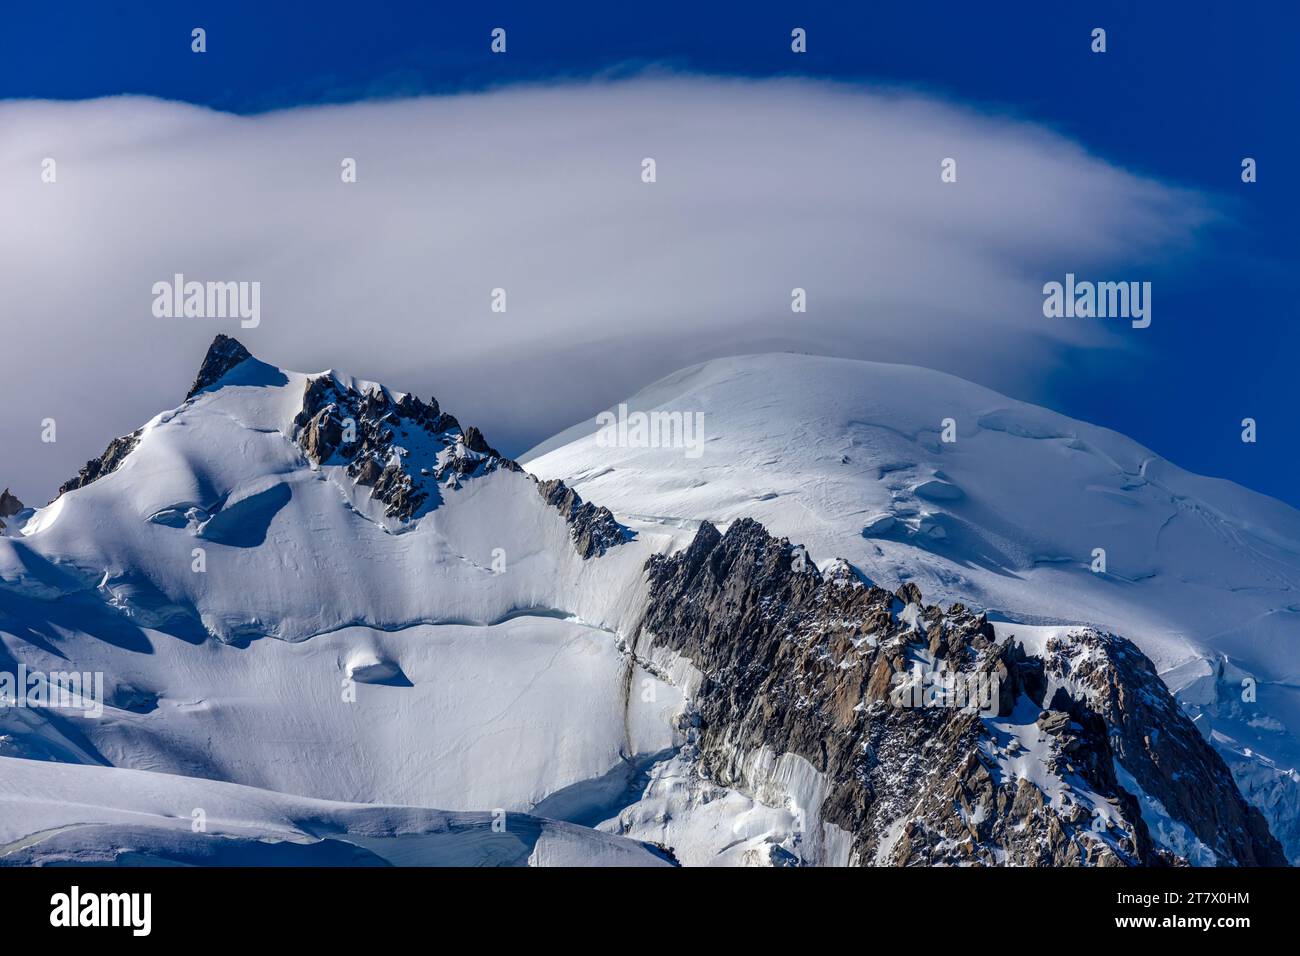 Alps snowcapped mountains in Chamonix, view from Aiguille du Midi peak summit. Alpine snow and glacier landscape in french Alps, range of Montblanc Stock Photo